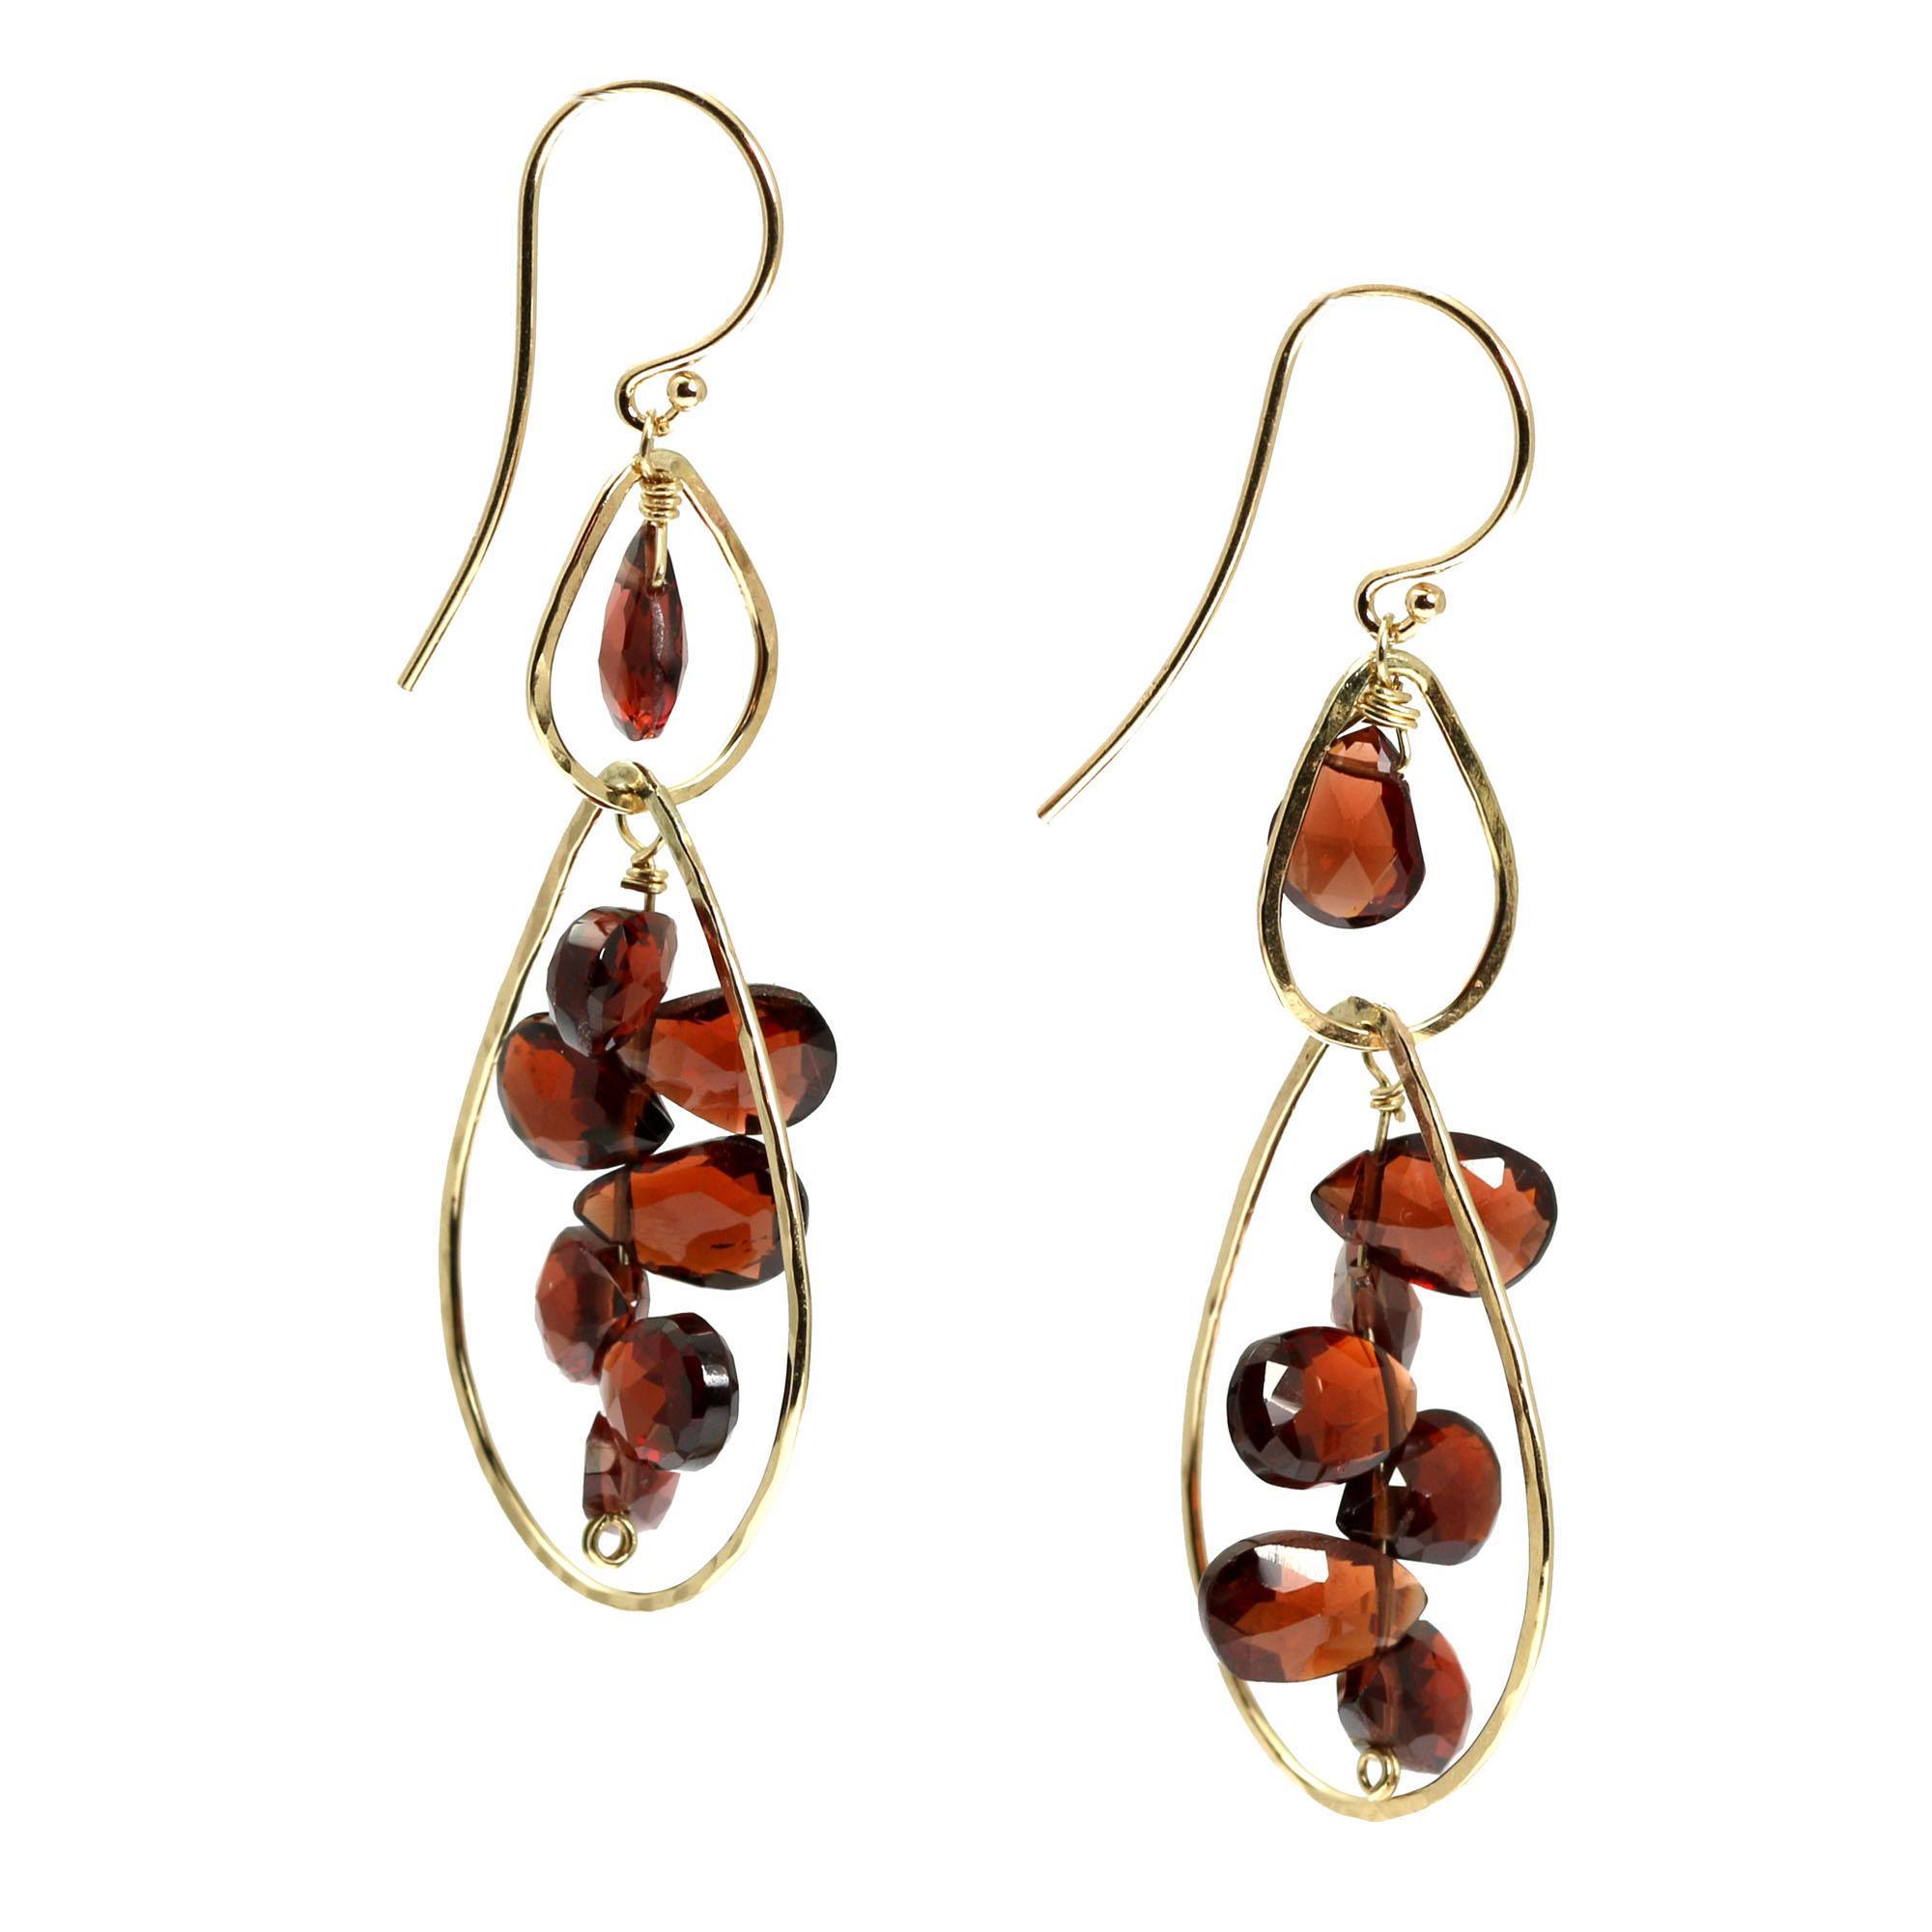 Close Up of 14K Gold Hammered Earrings With Garnets